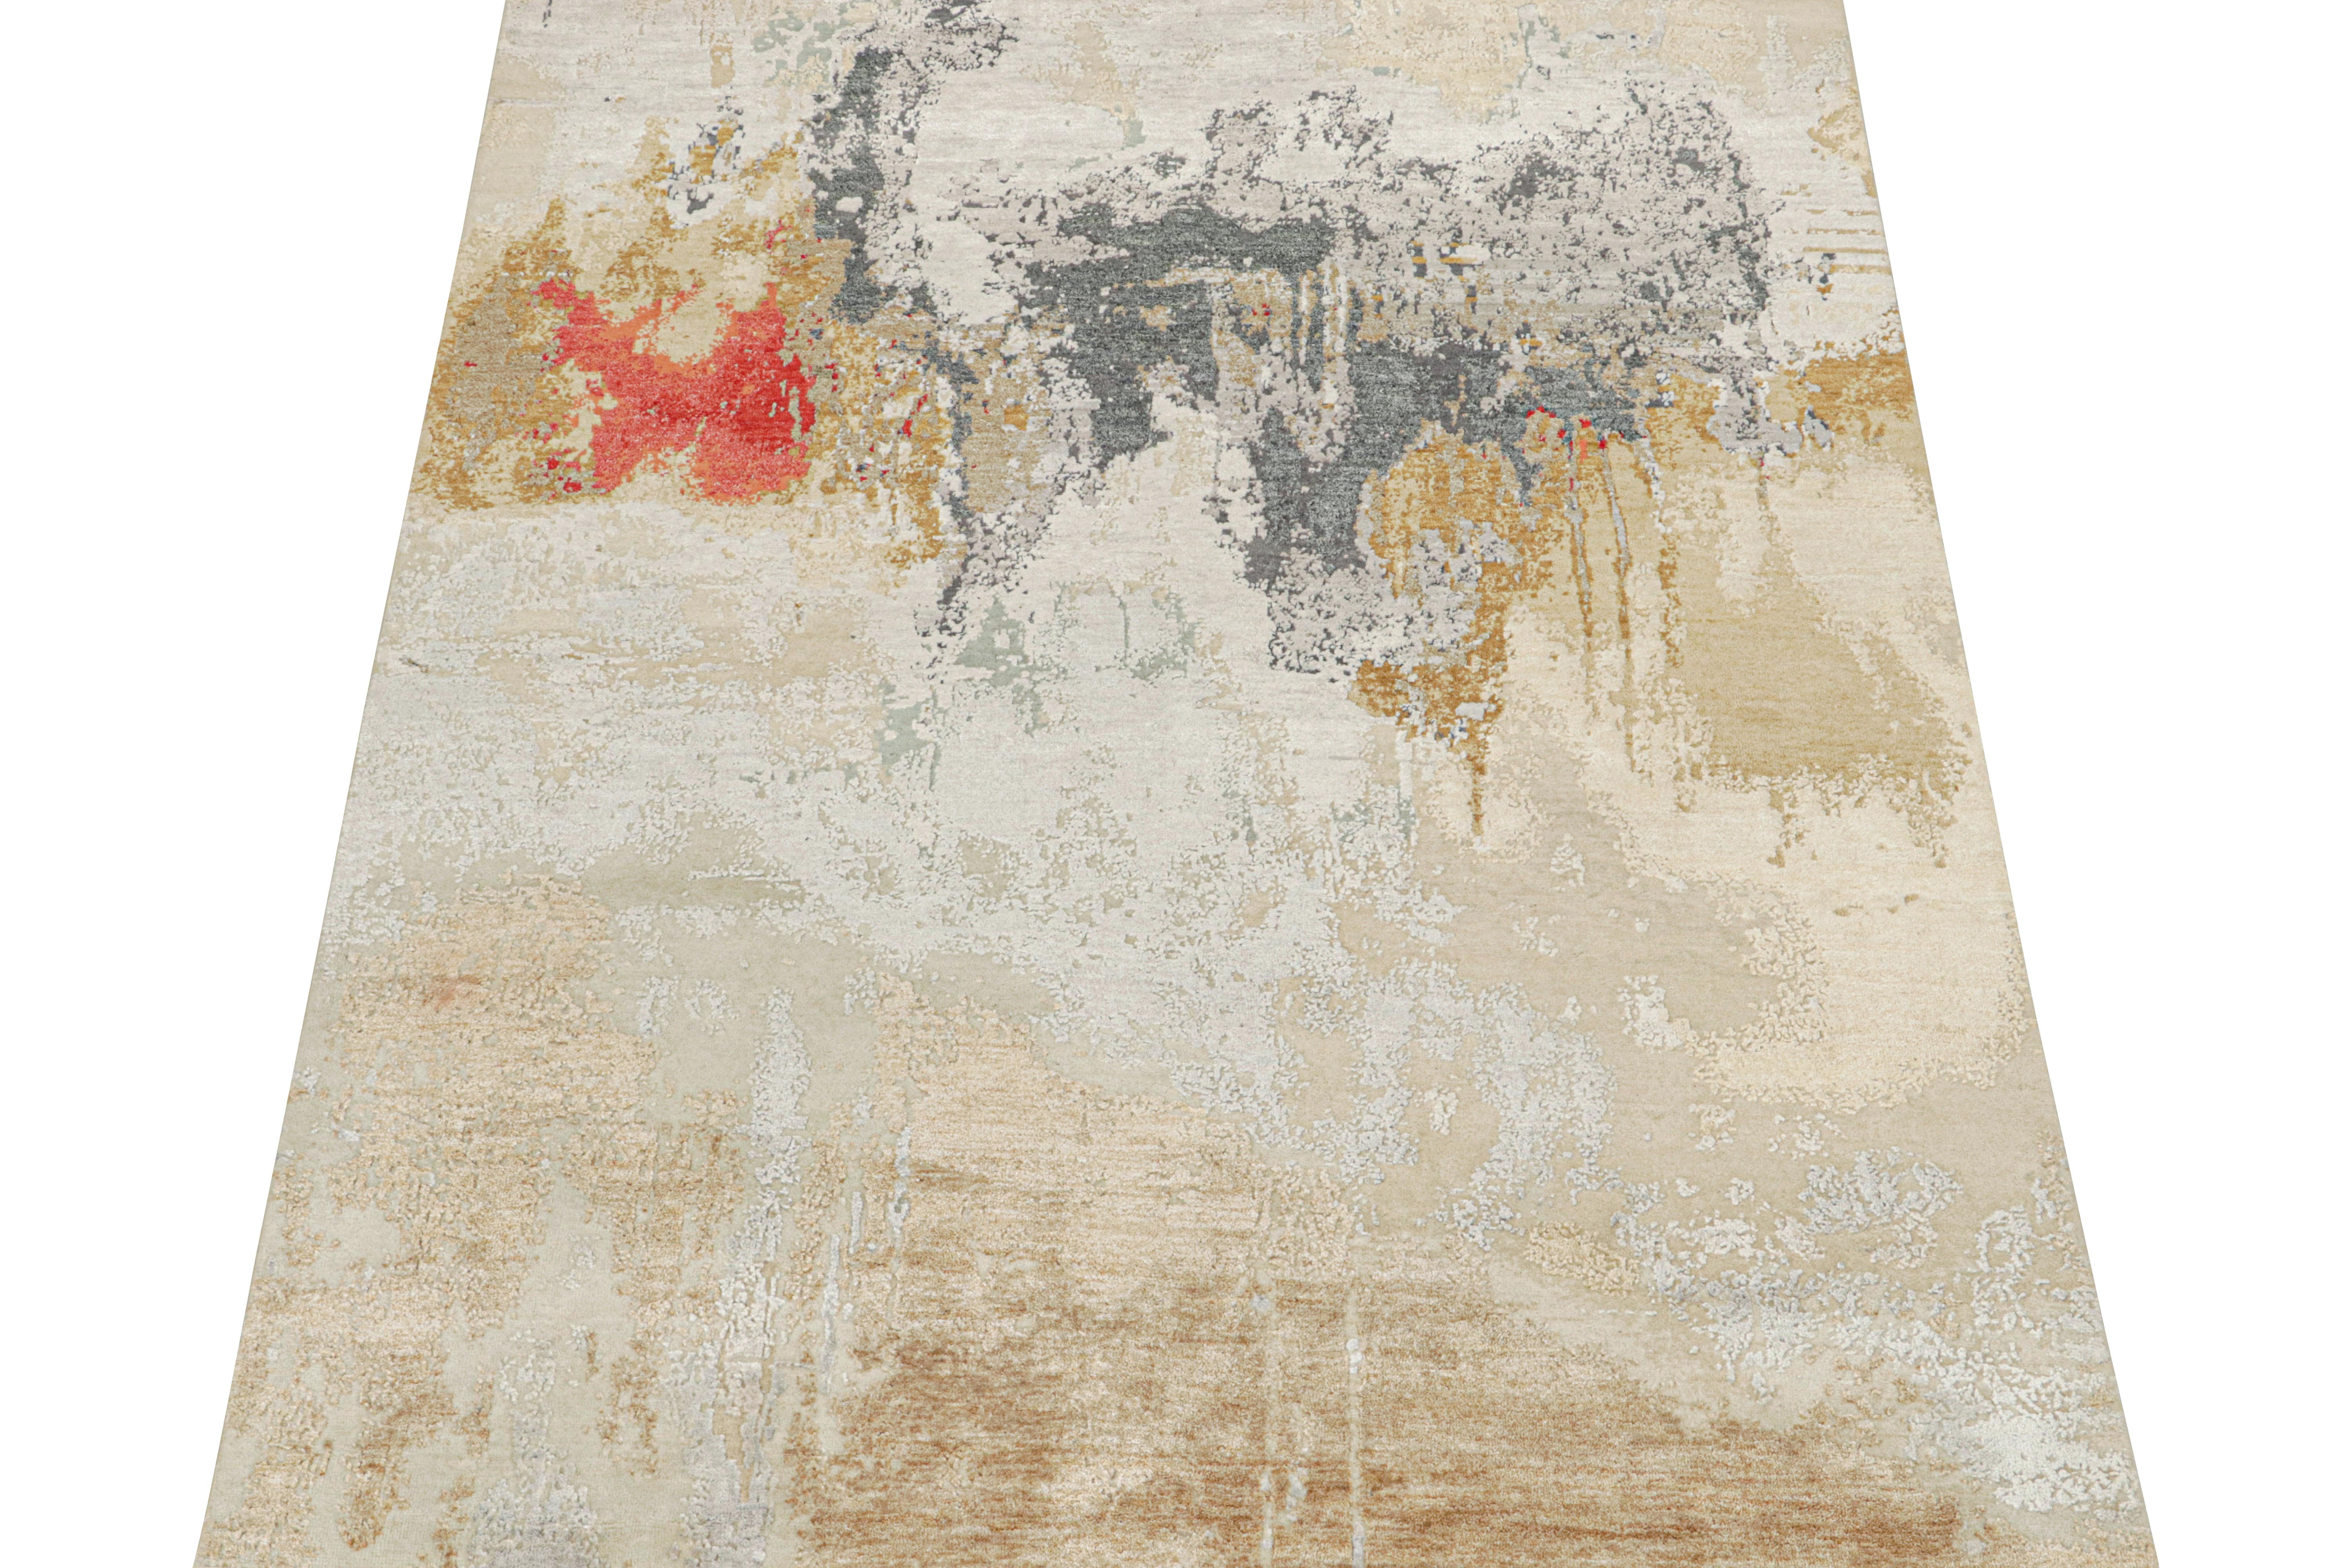 This 6x8 abstract rug is a new addition to Rug & Kilim’s contemporary rug collection. 

Hand-knotted in wool, cotton, and silk, its design enjoys a lively presence with splashes of beige-brown, gray, gold & red. Keen eyes will admire the silk’s